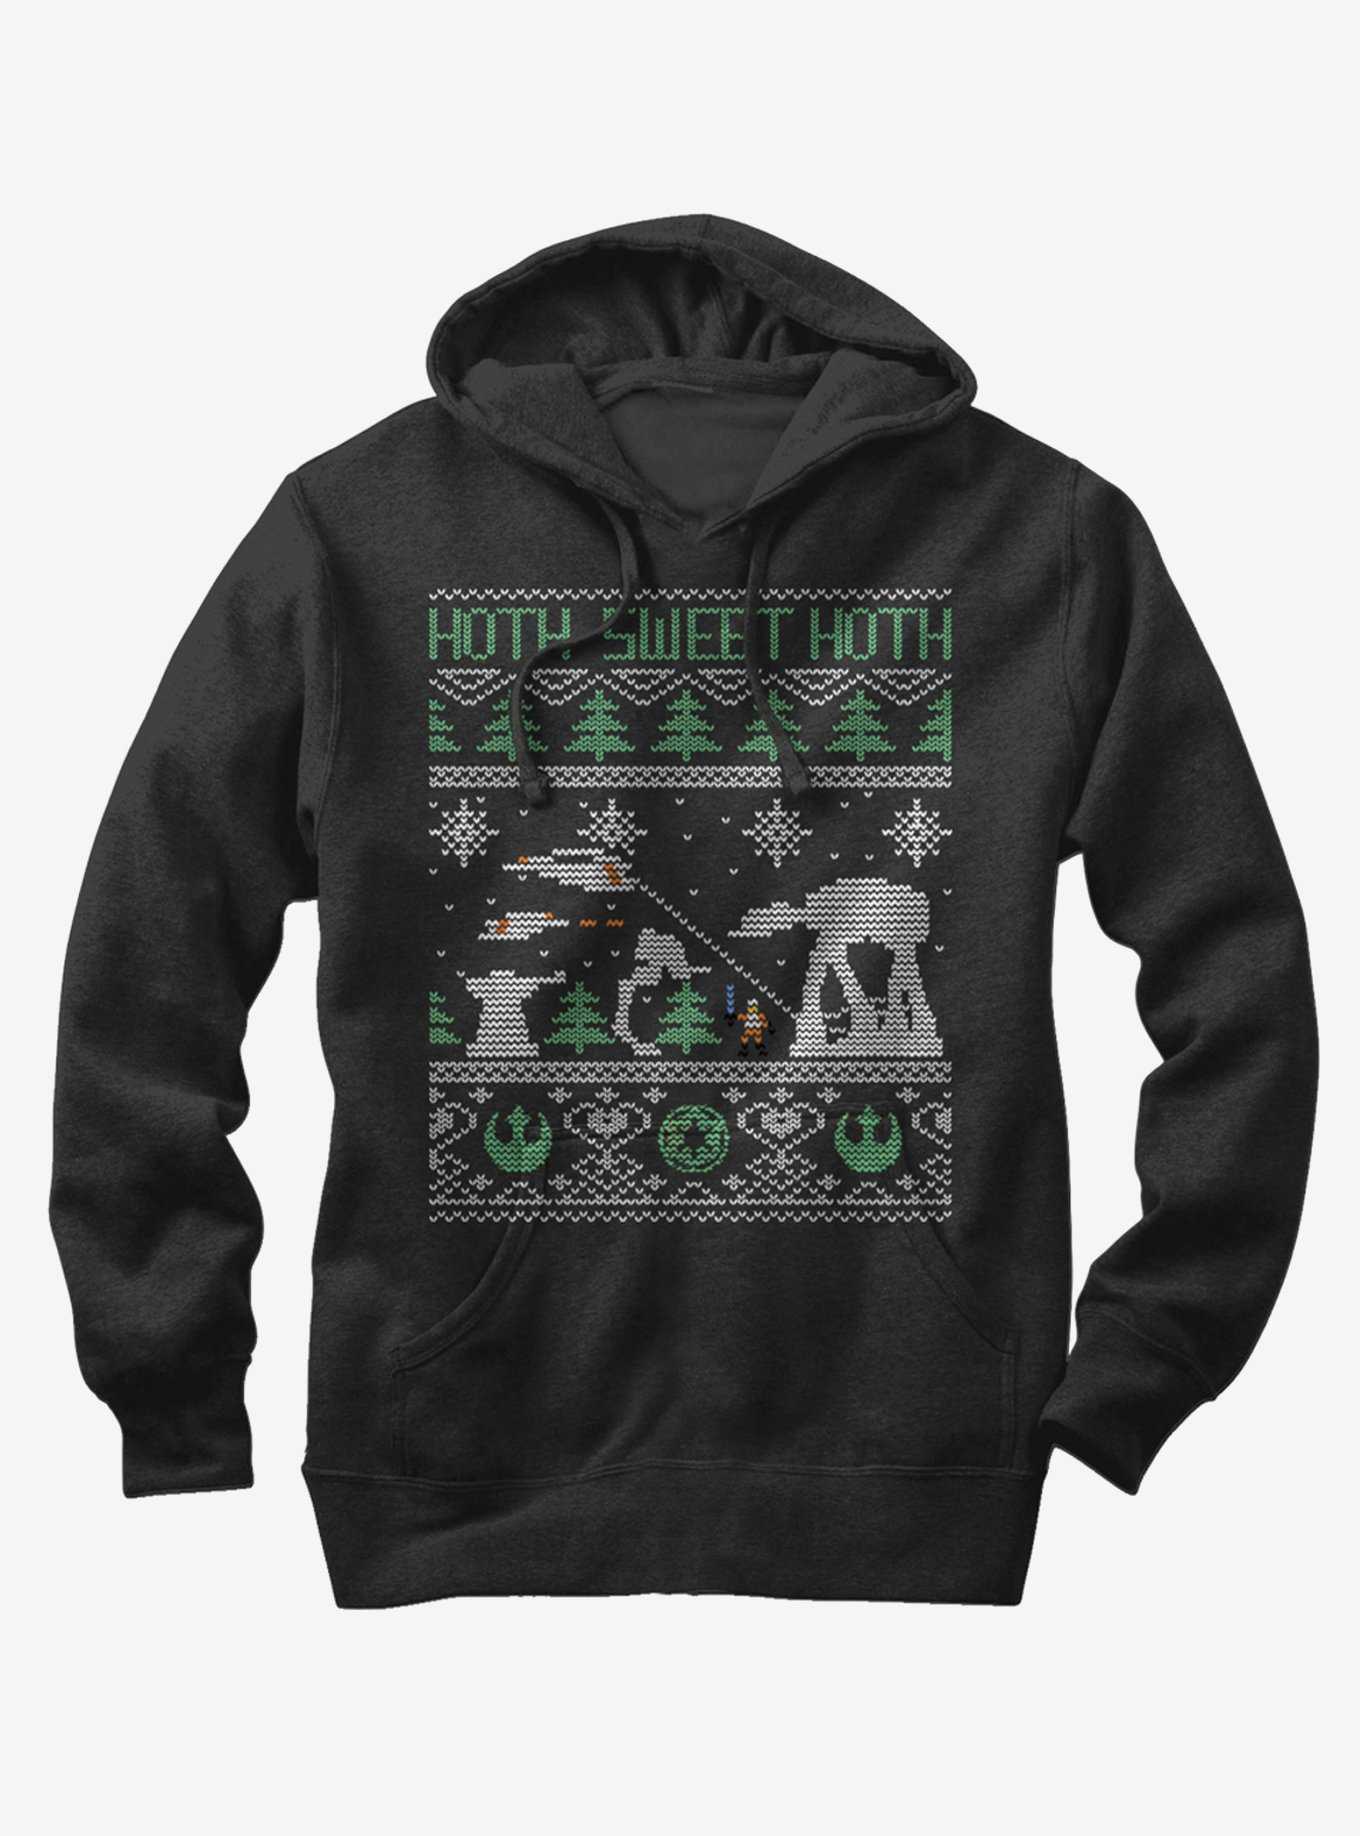 Star Wars Hoth Sweet Hoth Ugly Christmas Sweater Hoodie, , hi-res